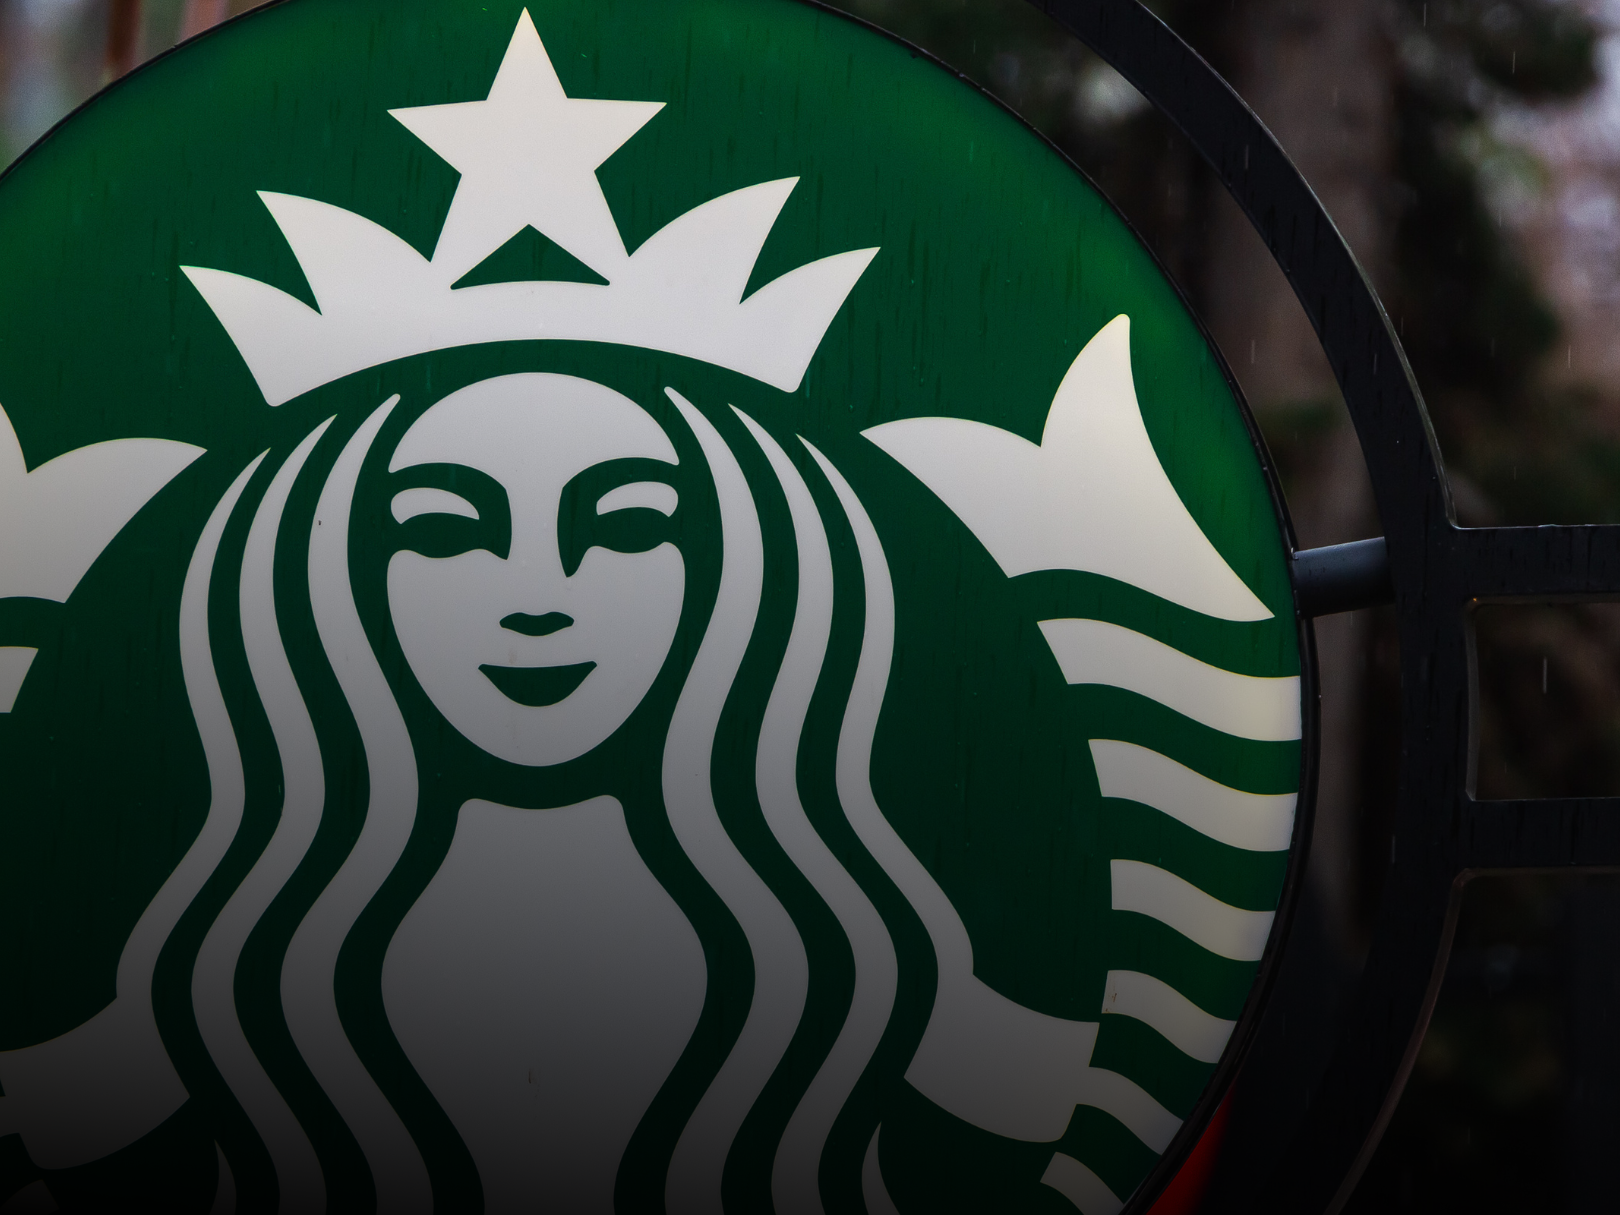 Starbucks Shows Weakness as Consumers Feel Inflation Fatigue